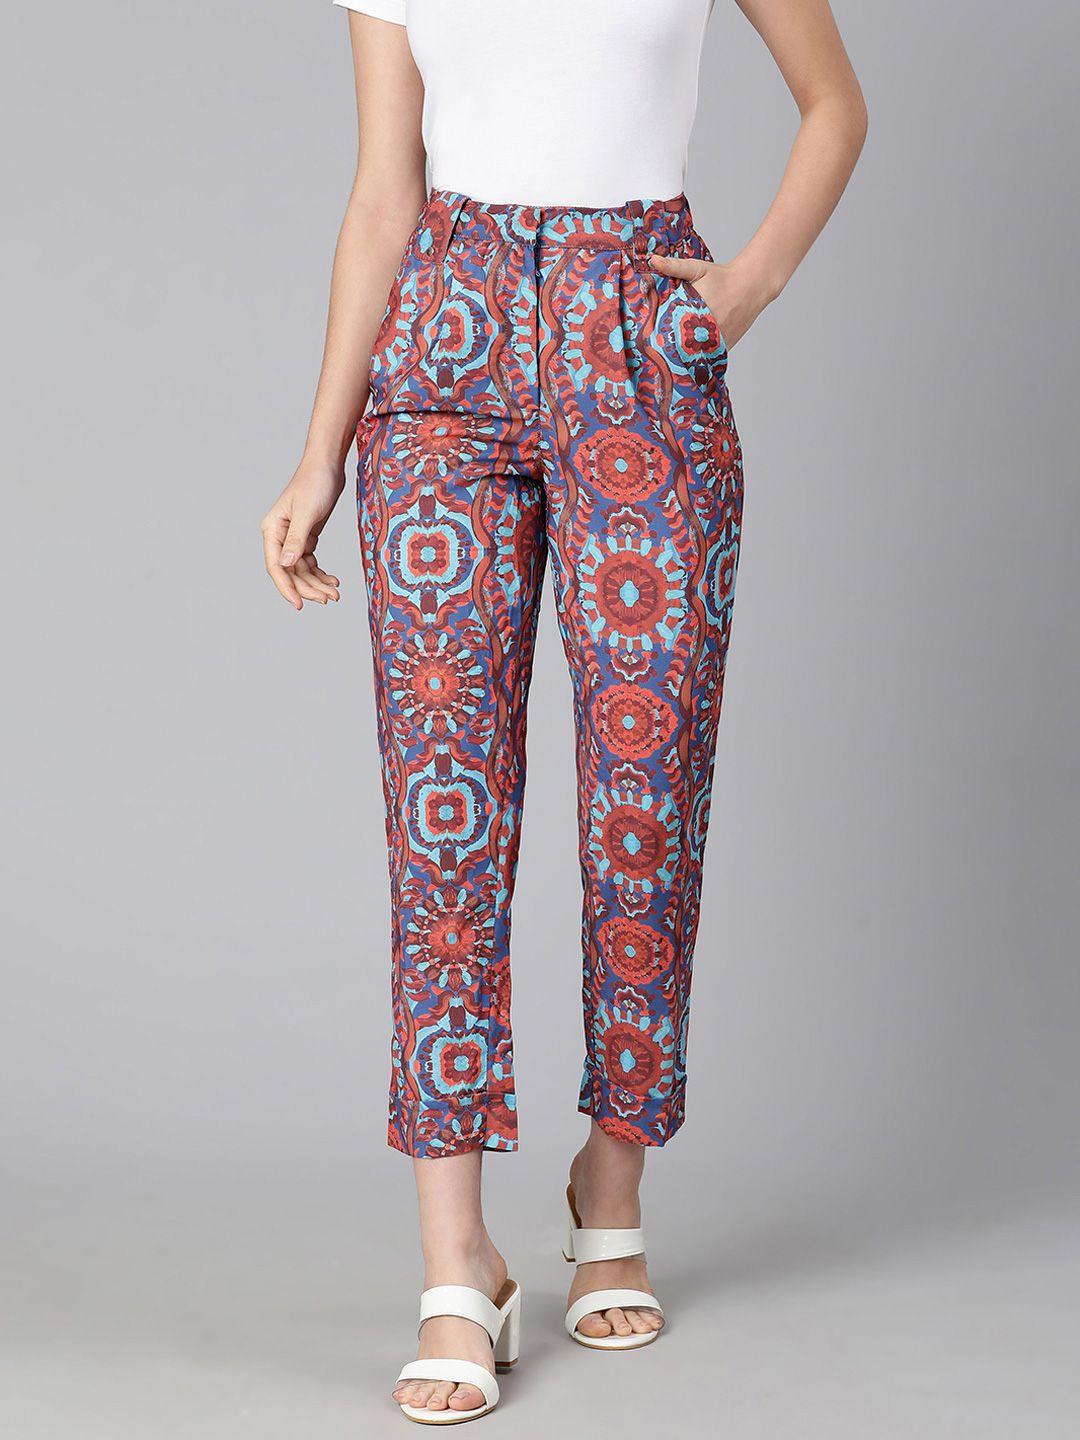 oxolloxo women blue & red abstract printed slim fit trousers